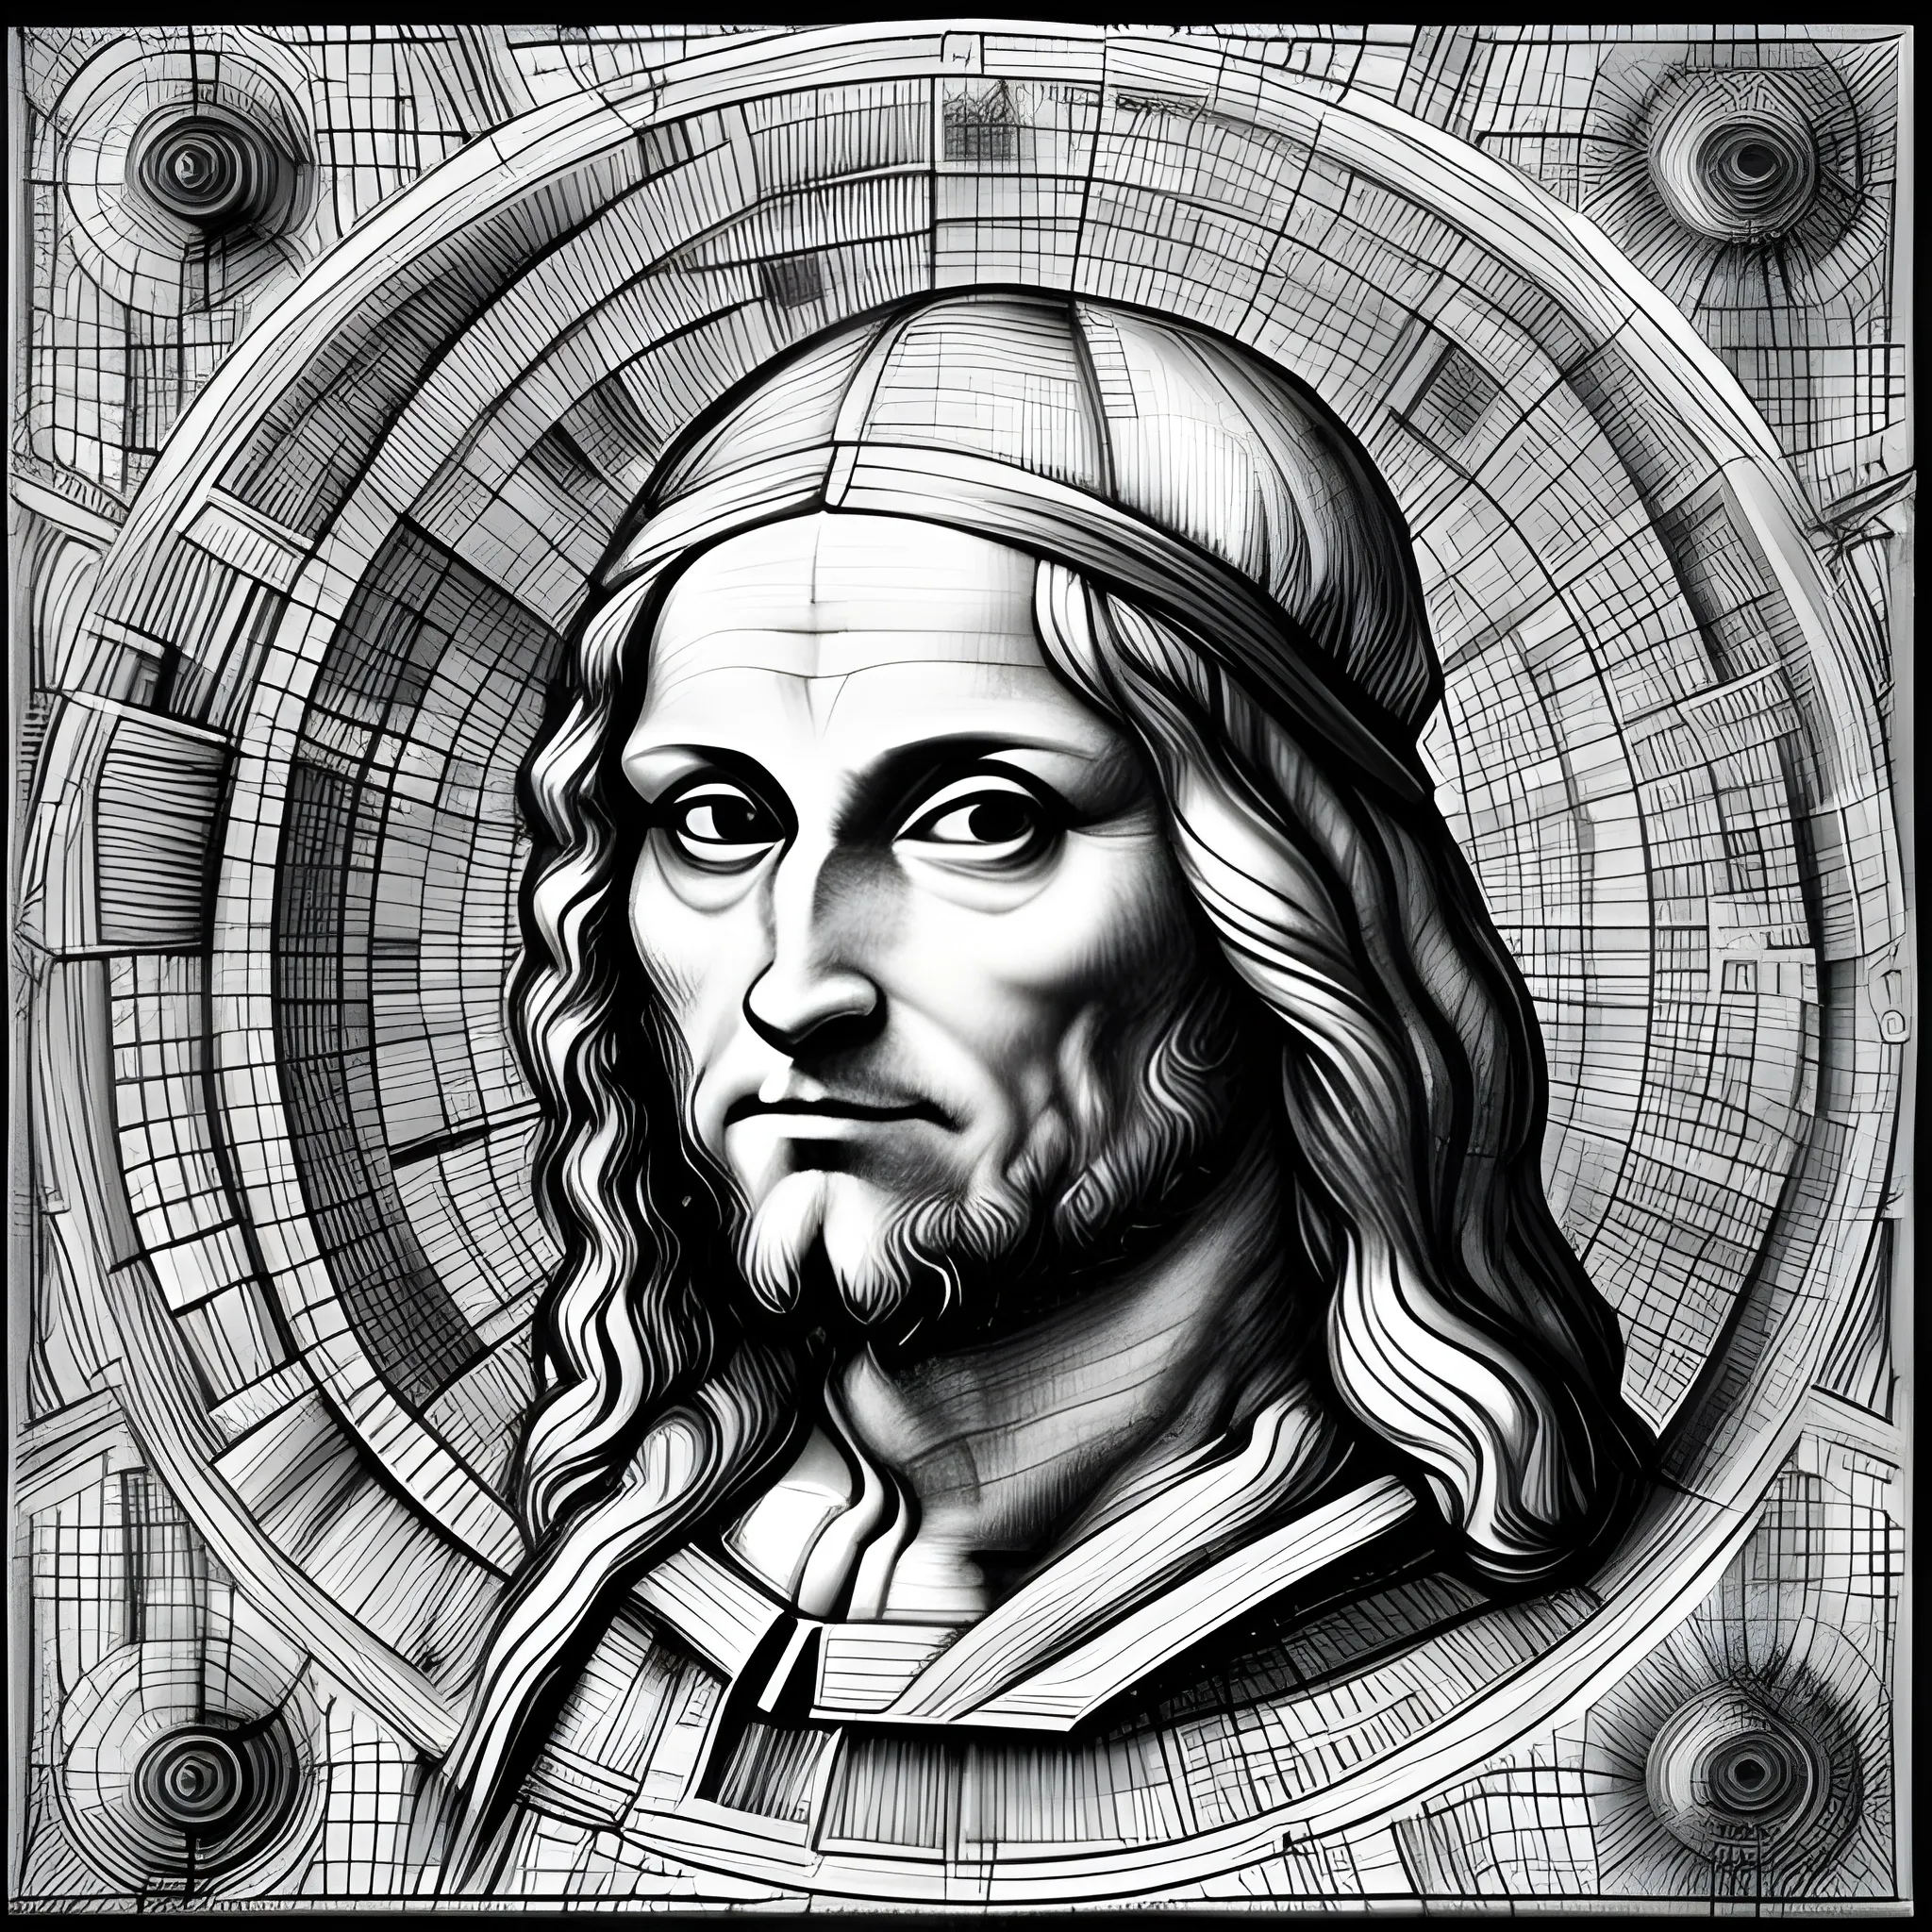 Generate a corporative, future, colorful, modern image, creative, related to digital products, use Leonardo da Vinci's drawing style, do not use machines or txt and use really environment, with this concept: “Polymath thinkers of the future, Leonardo da Vinci in our times”., Trippy, Pencil Sketch